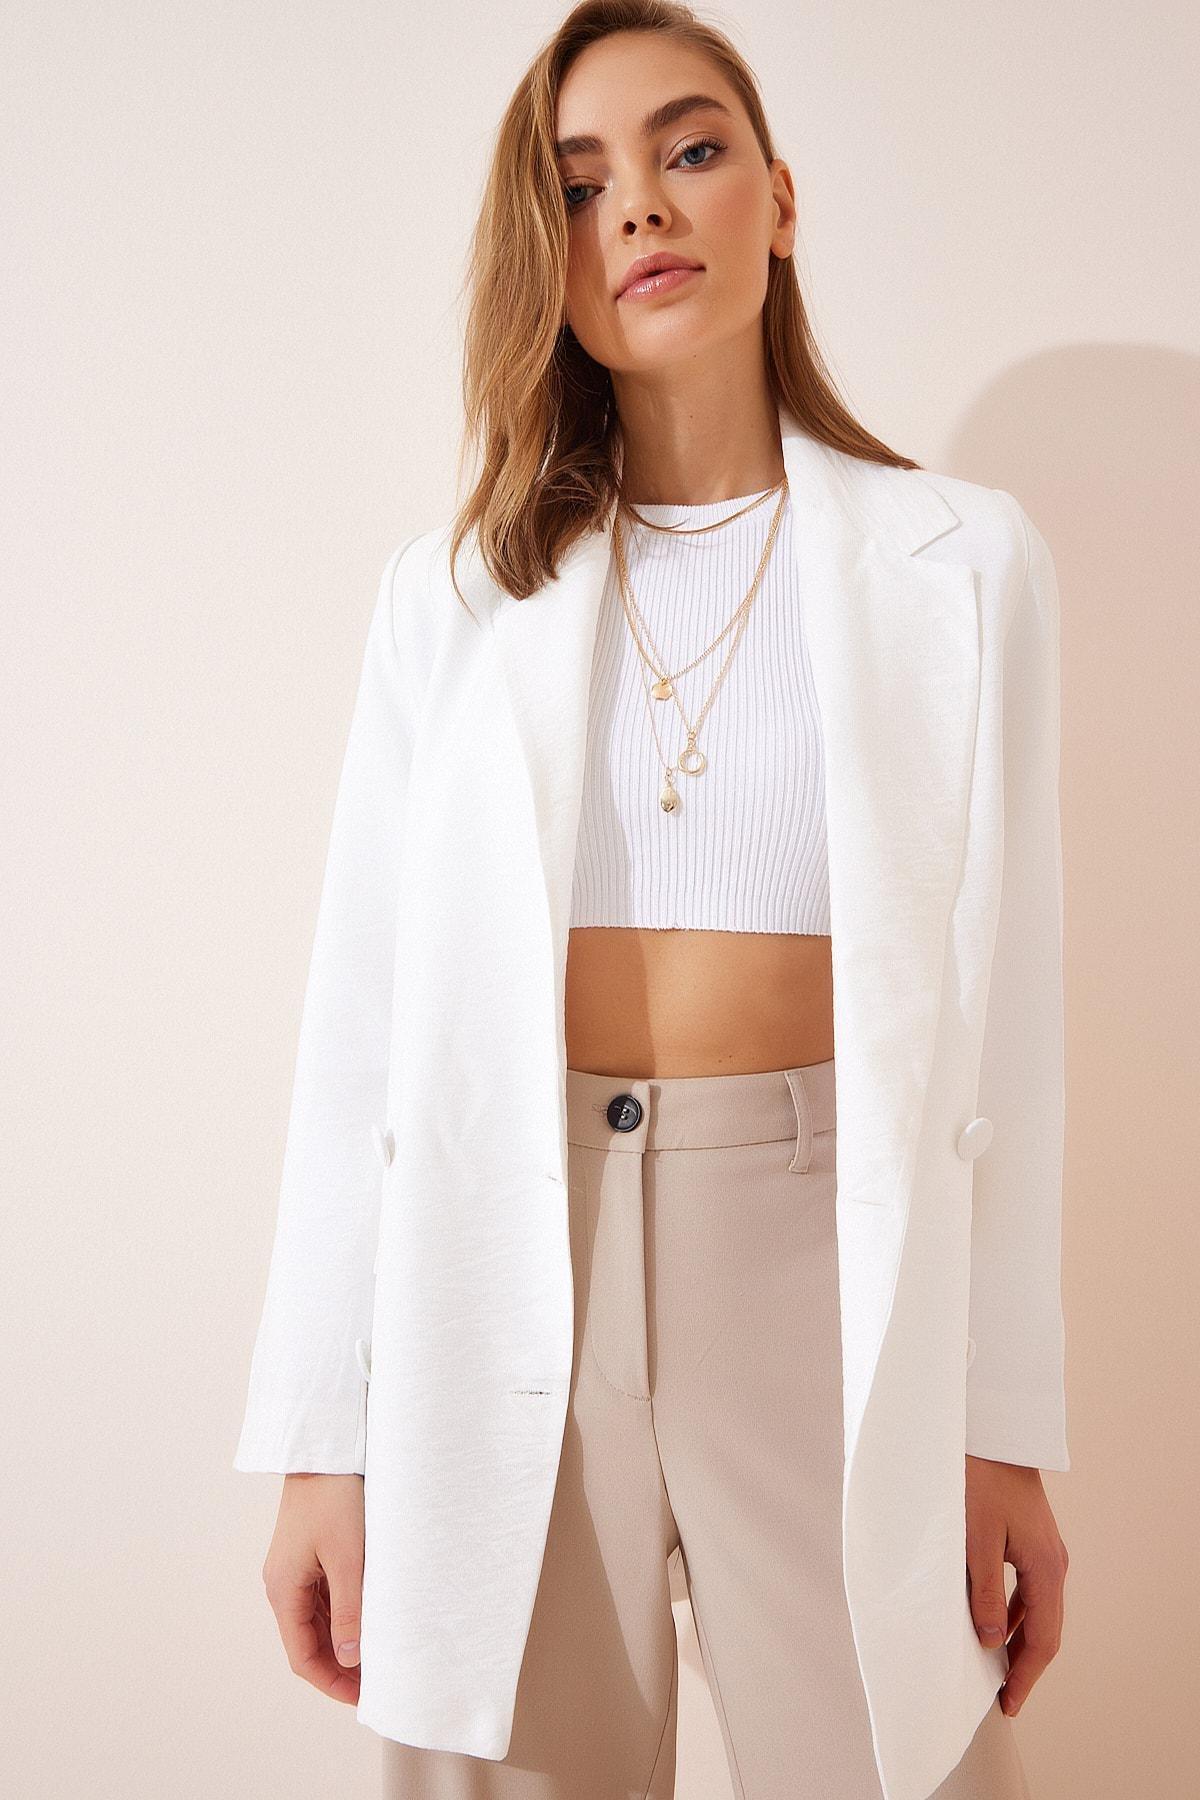 Happiness - White Double-Breasted Oversize Blazer